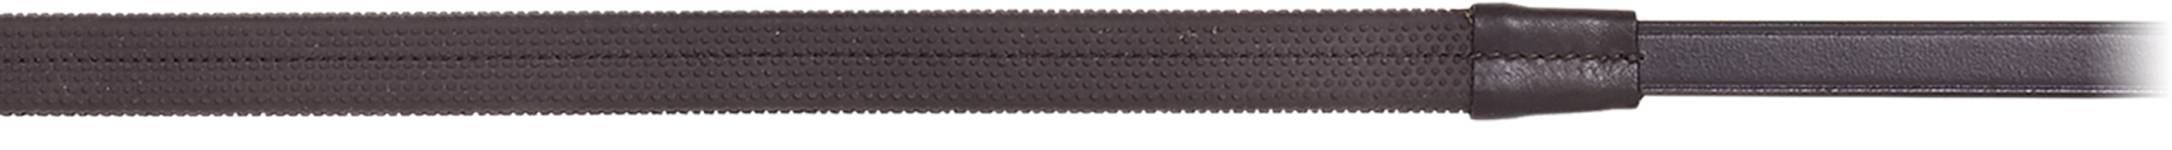 Ovation Rubber Covered Reins